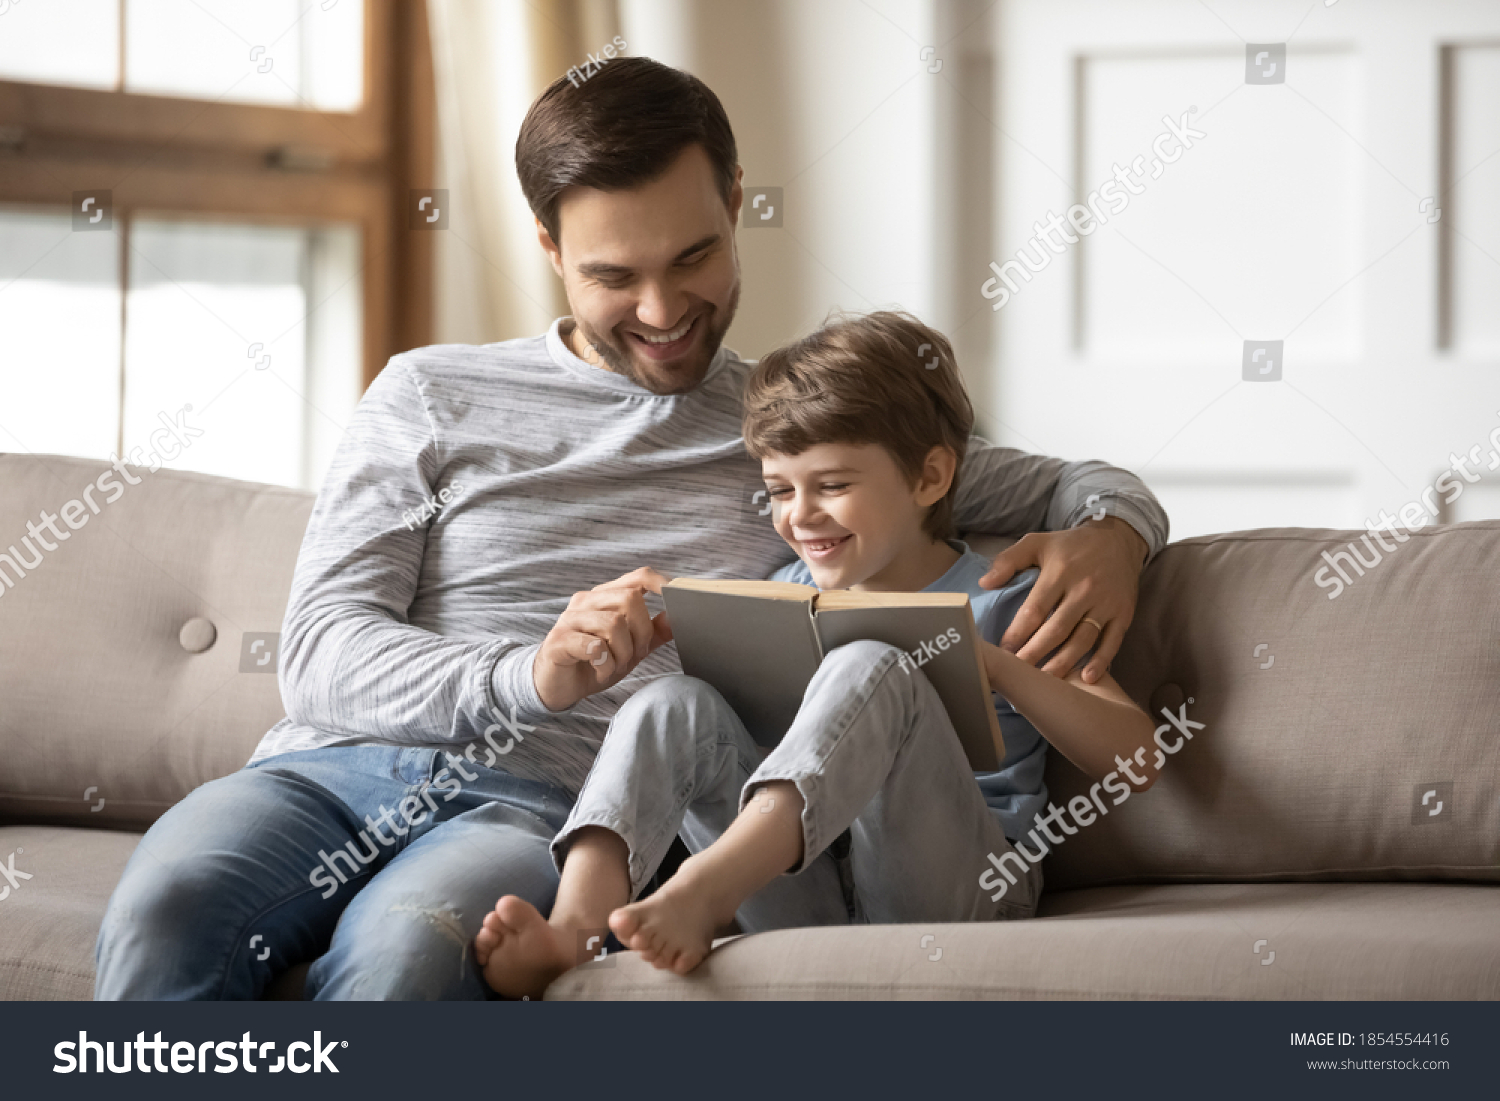 Loving happy father teaching adorable son to read, smiling dad and little boy child hugging, sitting on couch, holding book with fairy tale story, family spending weekend together, leisure time #1854554416